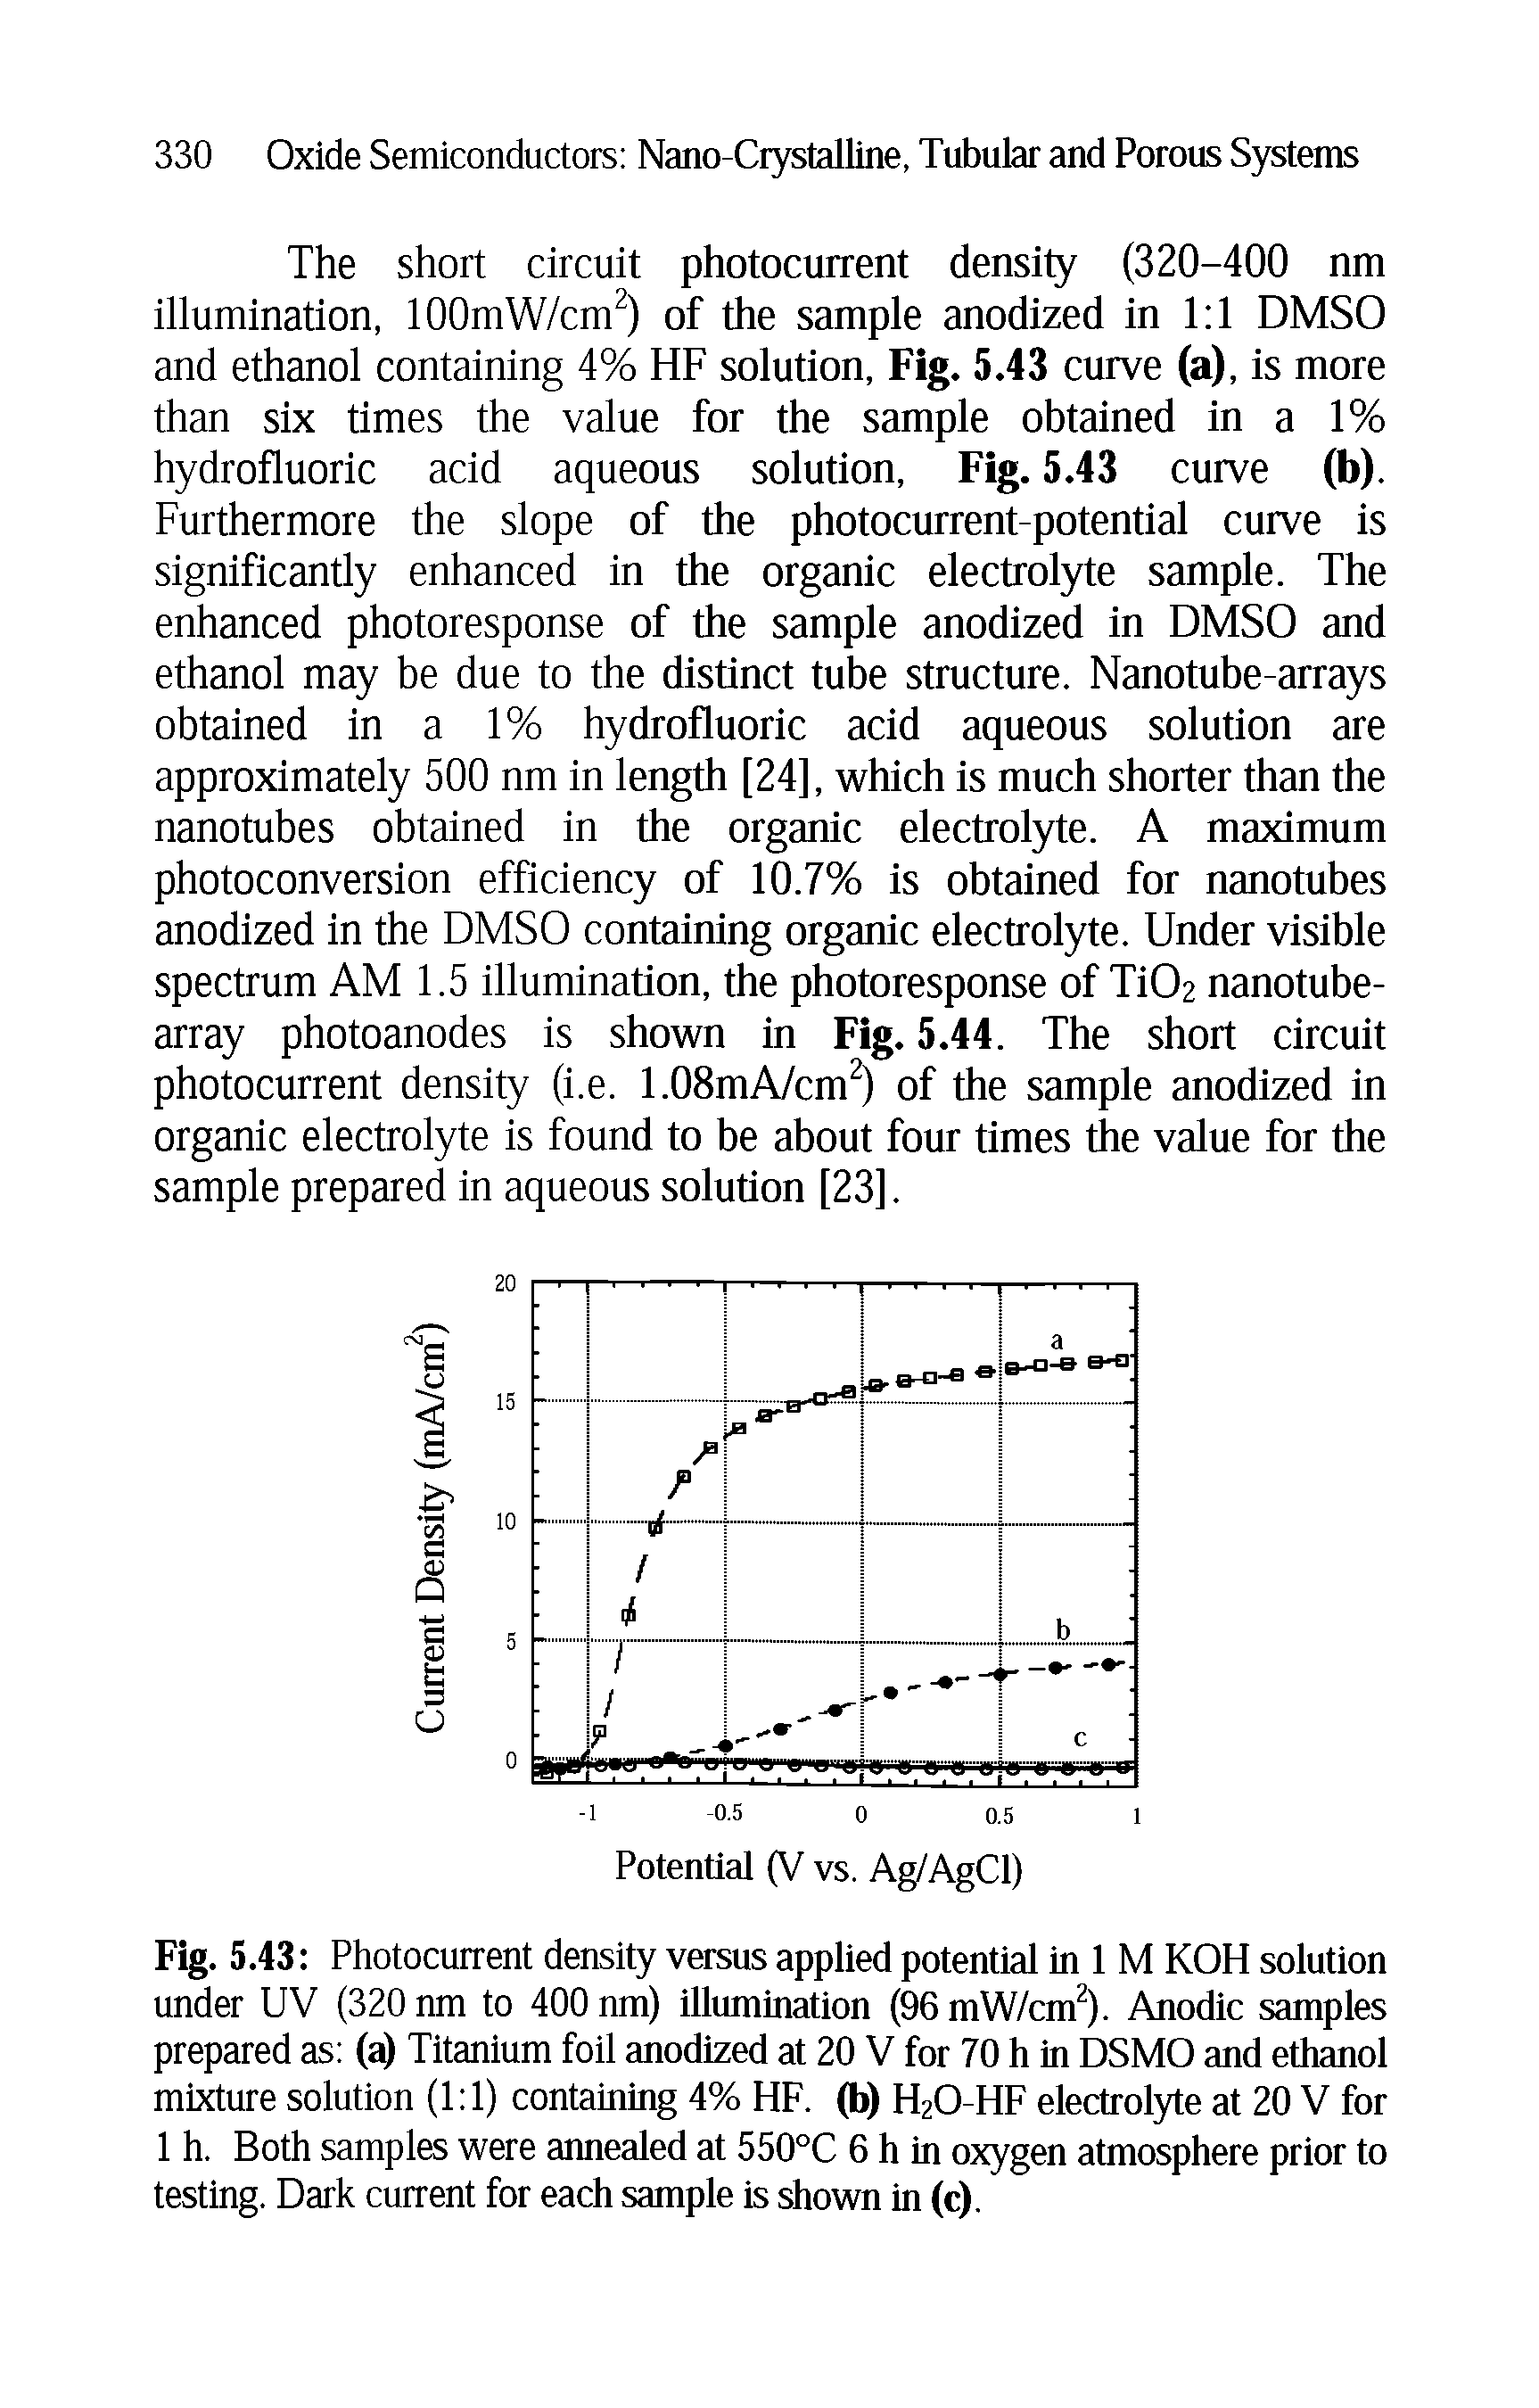 Fig. 5.43 Photocurrent density versus applied potential in 1 M KOH solution under UV (320 nm to 400 nm) illumination (96 mW/cm ). Anodic samples prepared as (a Titanium foil anodized at 20 V for 70 h in DSMO and ethanol mixture solution (1 1) containing 4% HF. (b) H2O-HF electrolyte at 20 V for 1 h. Both samples were annealed at 550°C 6 h in oxygen atmosphere prior to testing. Dark current for each sample is shown in (c).